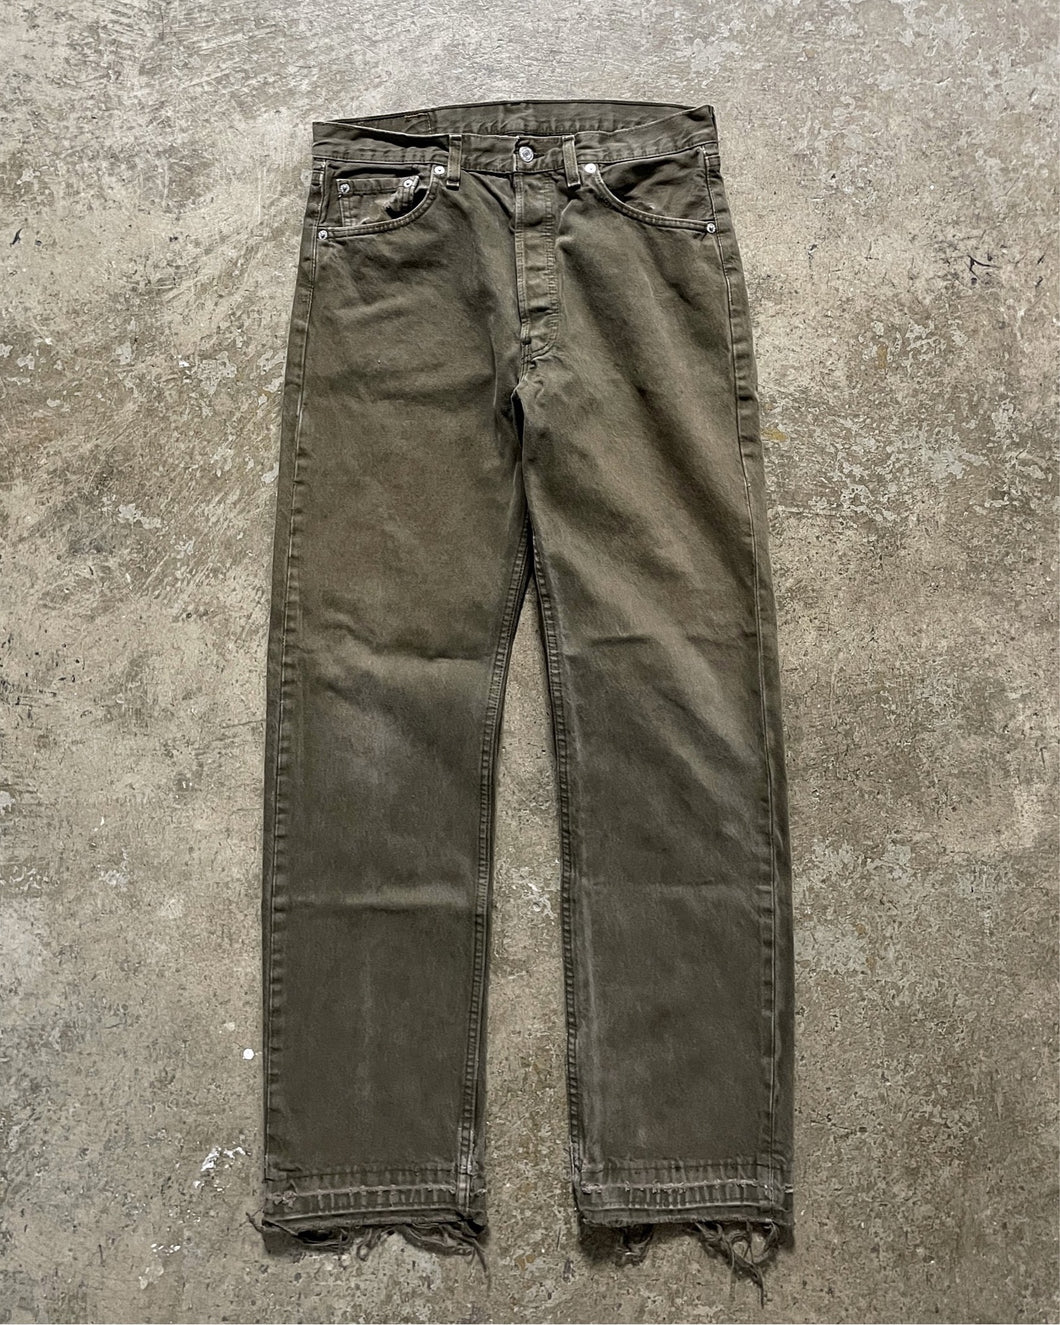 LEVI'S 501 FADED OLIVE GREEN JEANS - 1990S